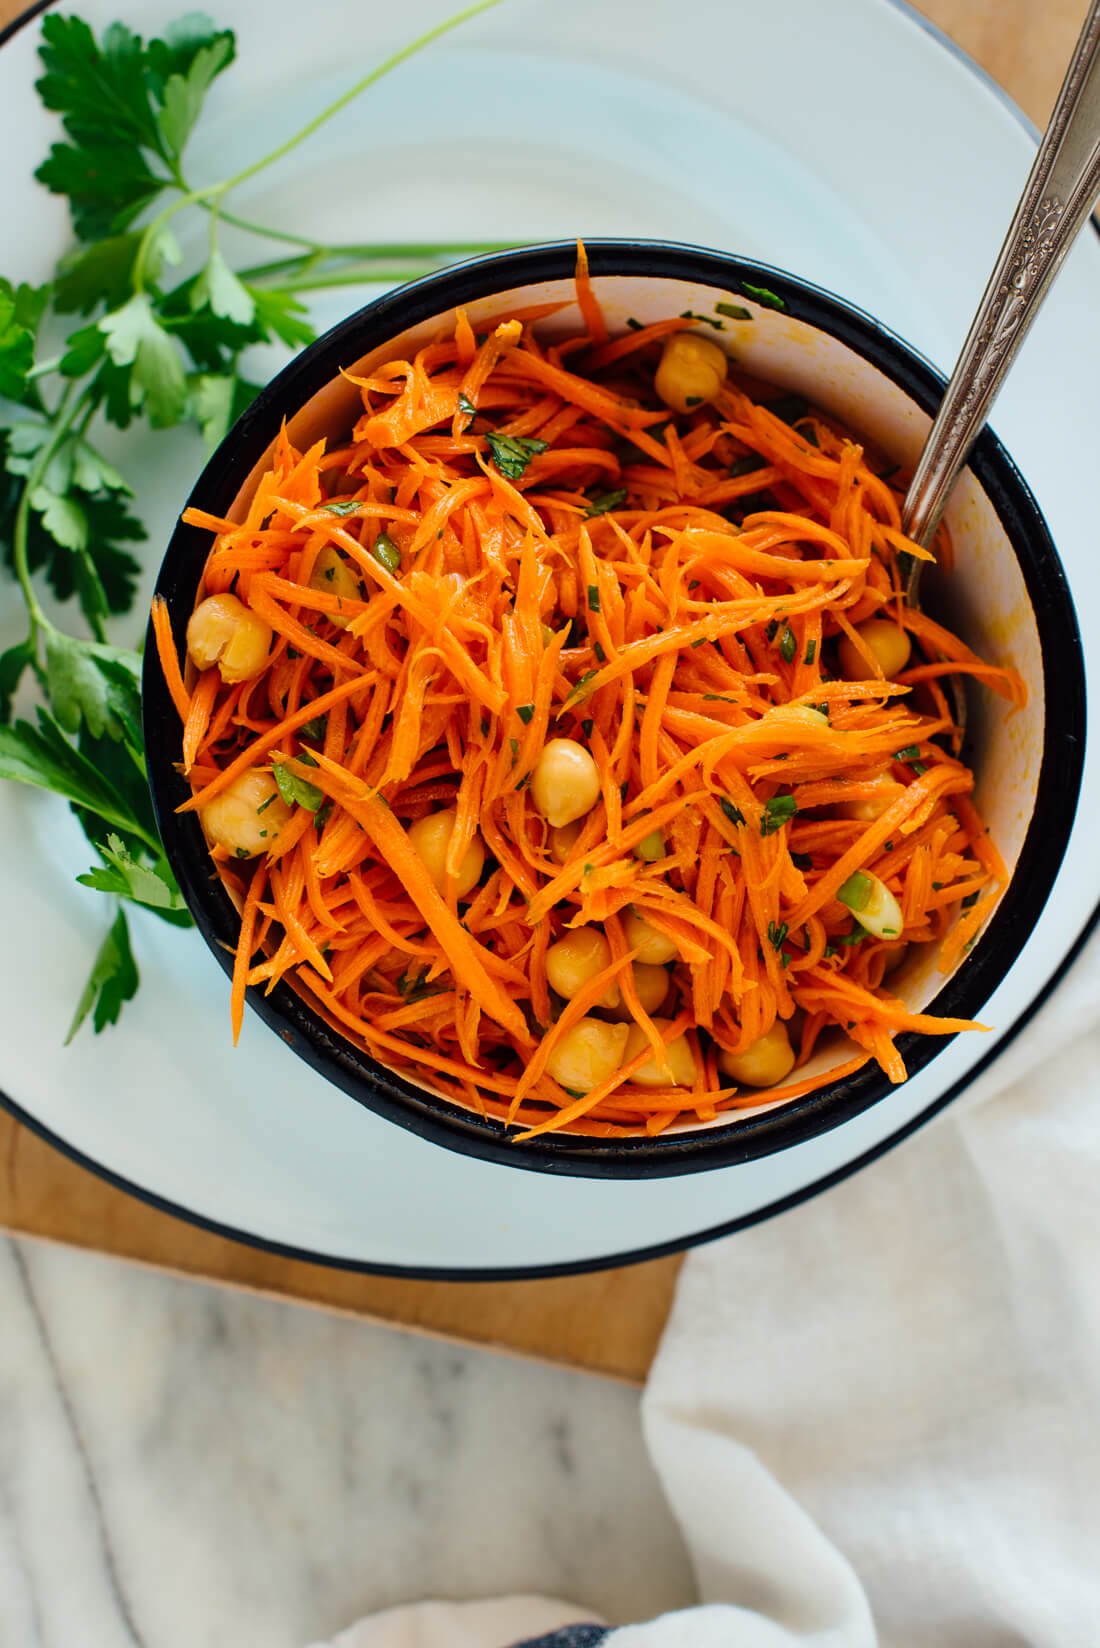 French carrot salad with optional chickpeas